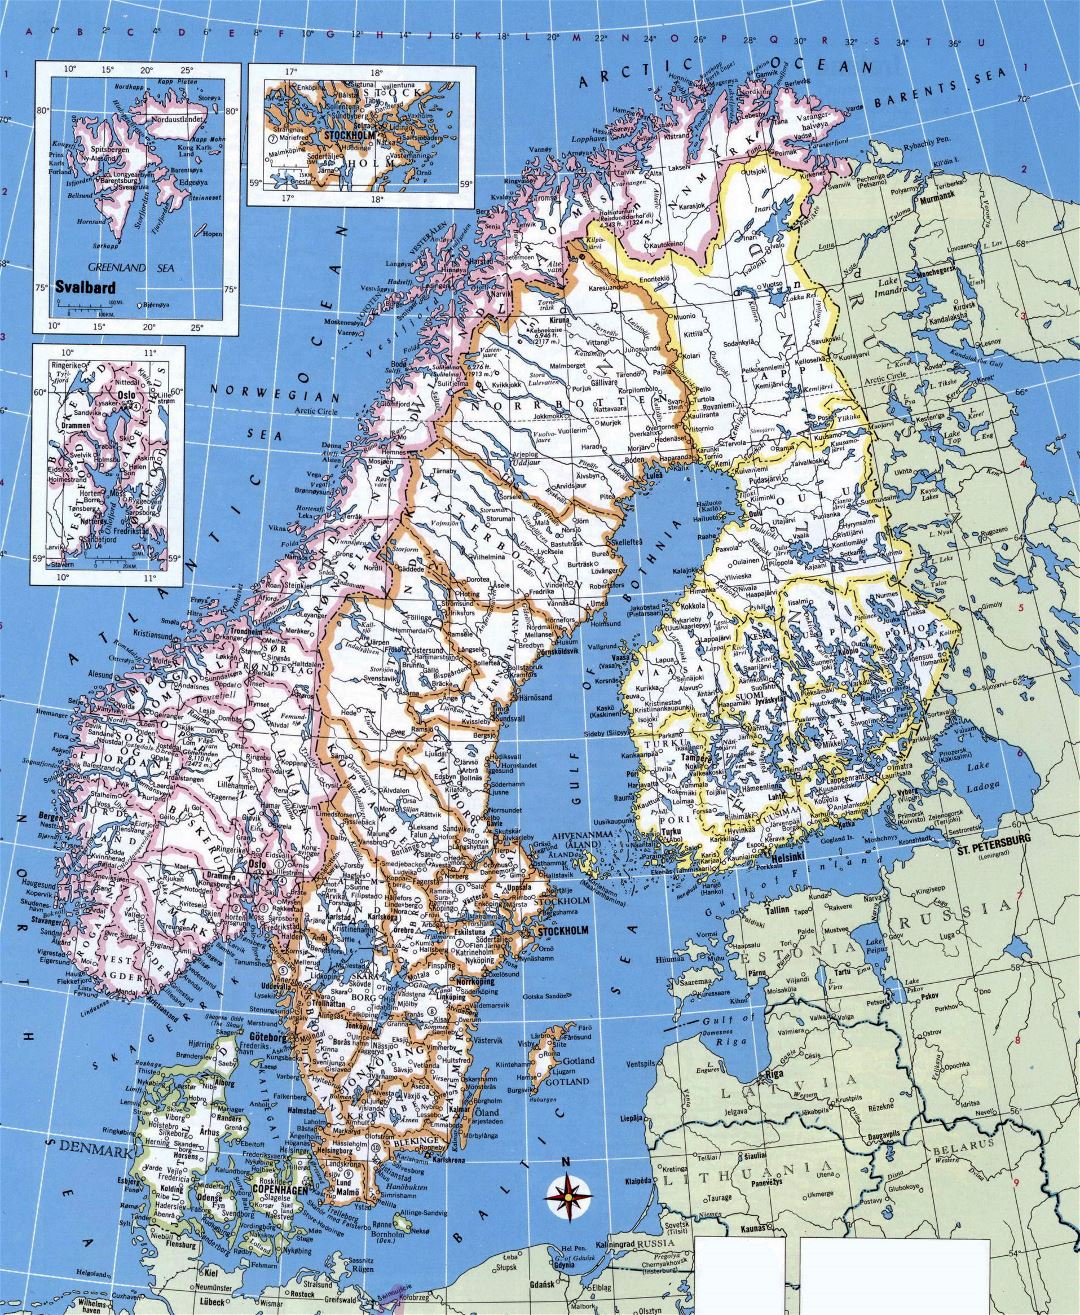 Large detailed political and administrative map of Norway, Sweden, Finland and Denmark with major cities